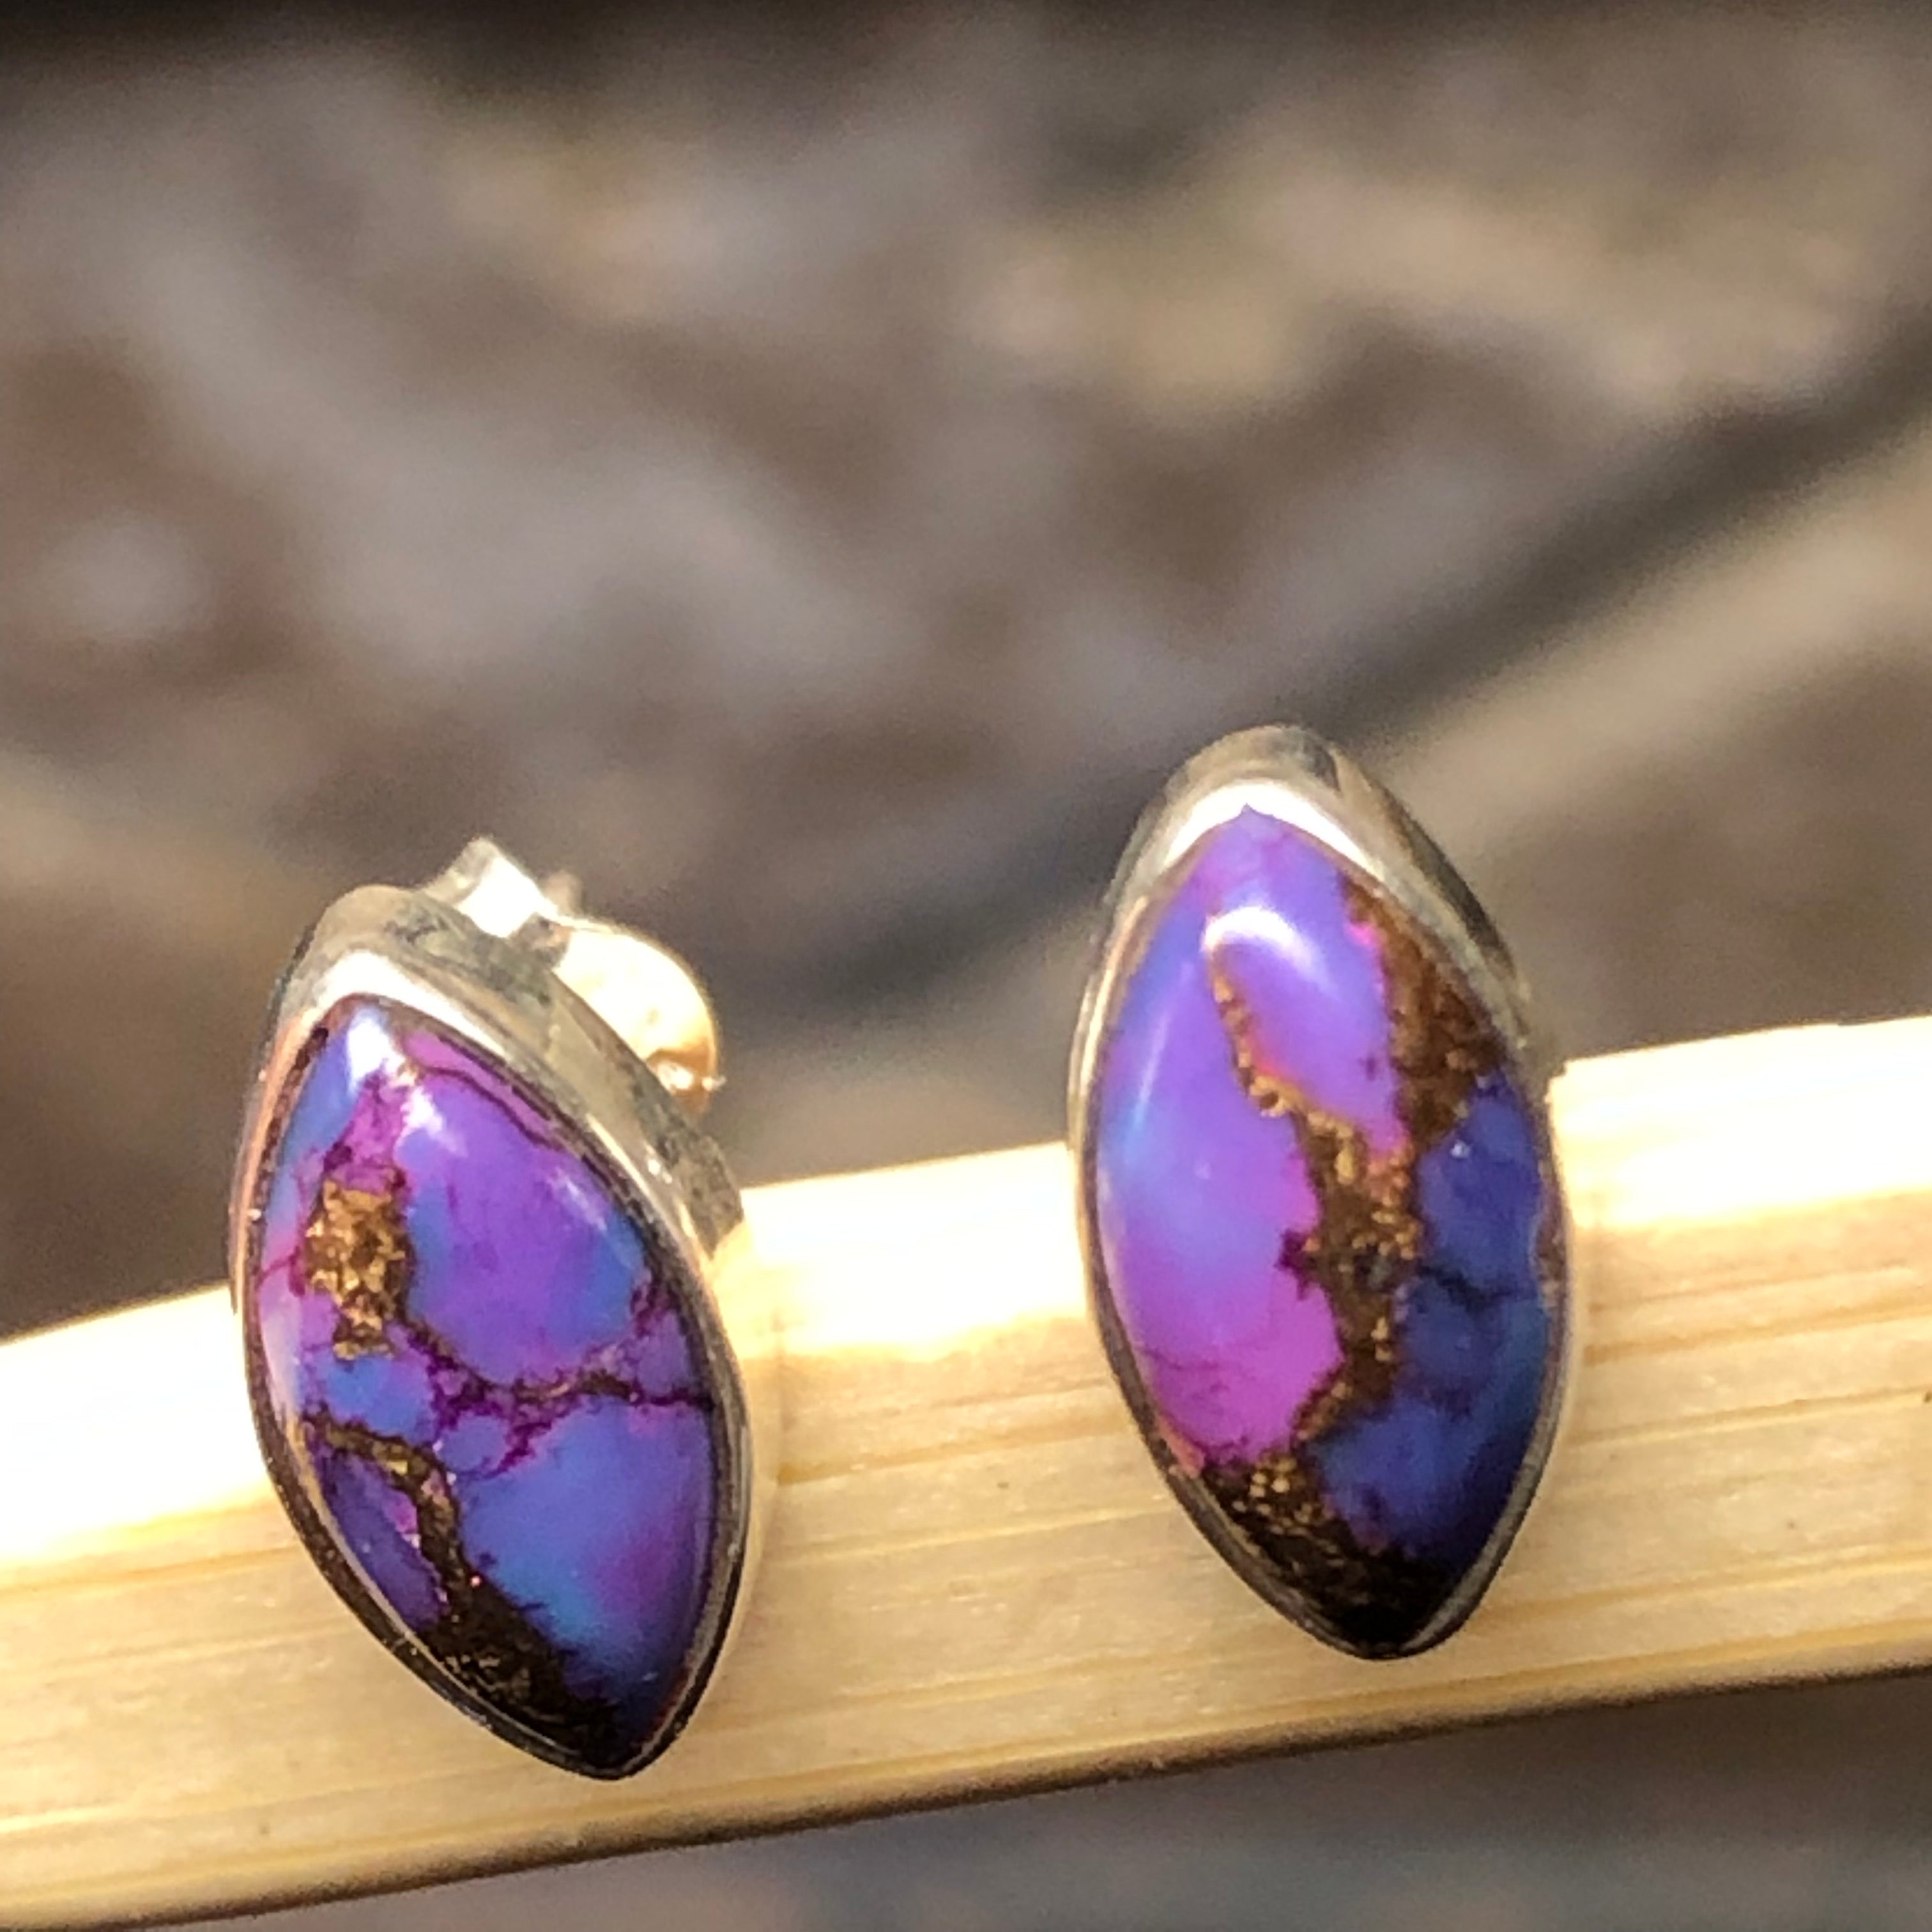 Gorgeous Purple Mohave Turquoise 925 Solid Sterling Silver Earrings 10mm - Natural Rocks by Kala